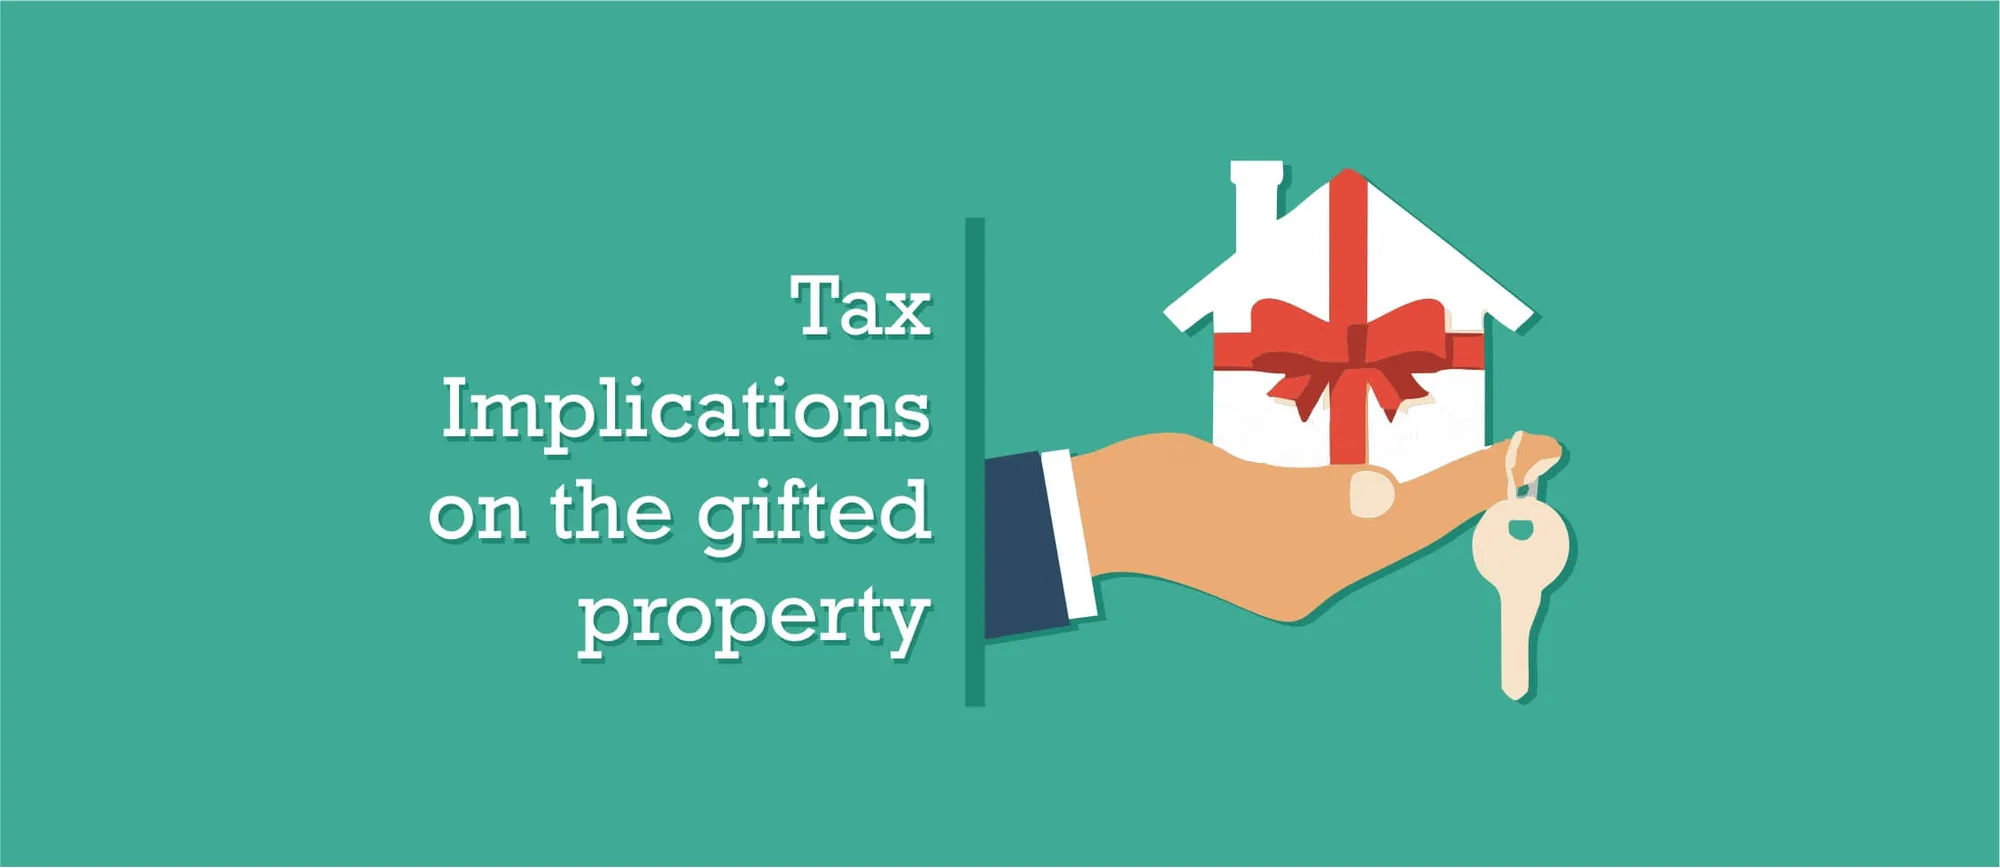 Tax implications on a gifted property